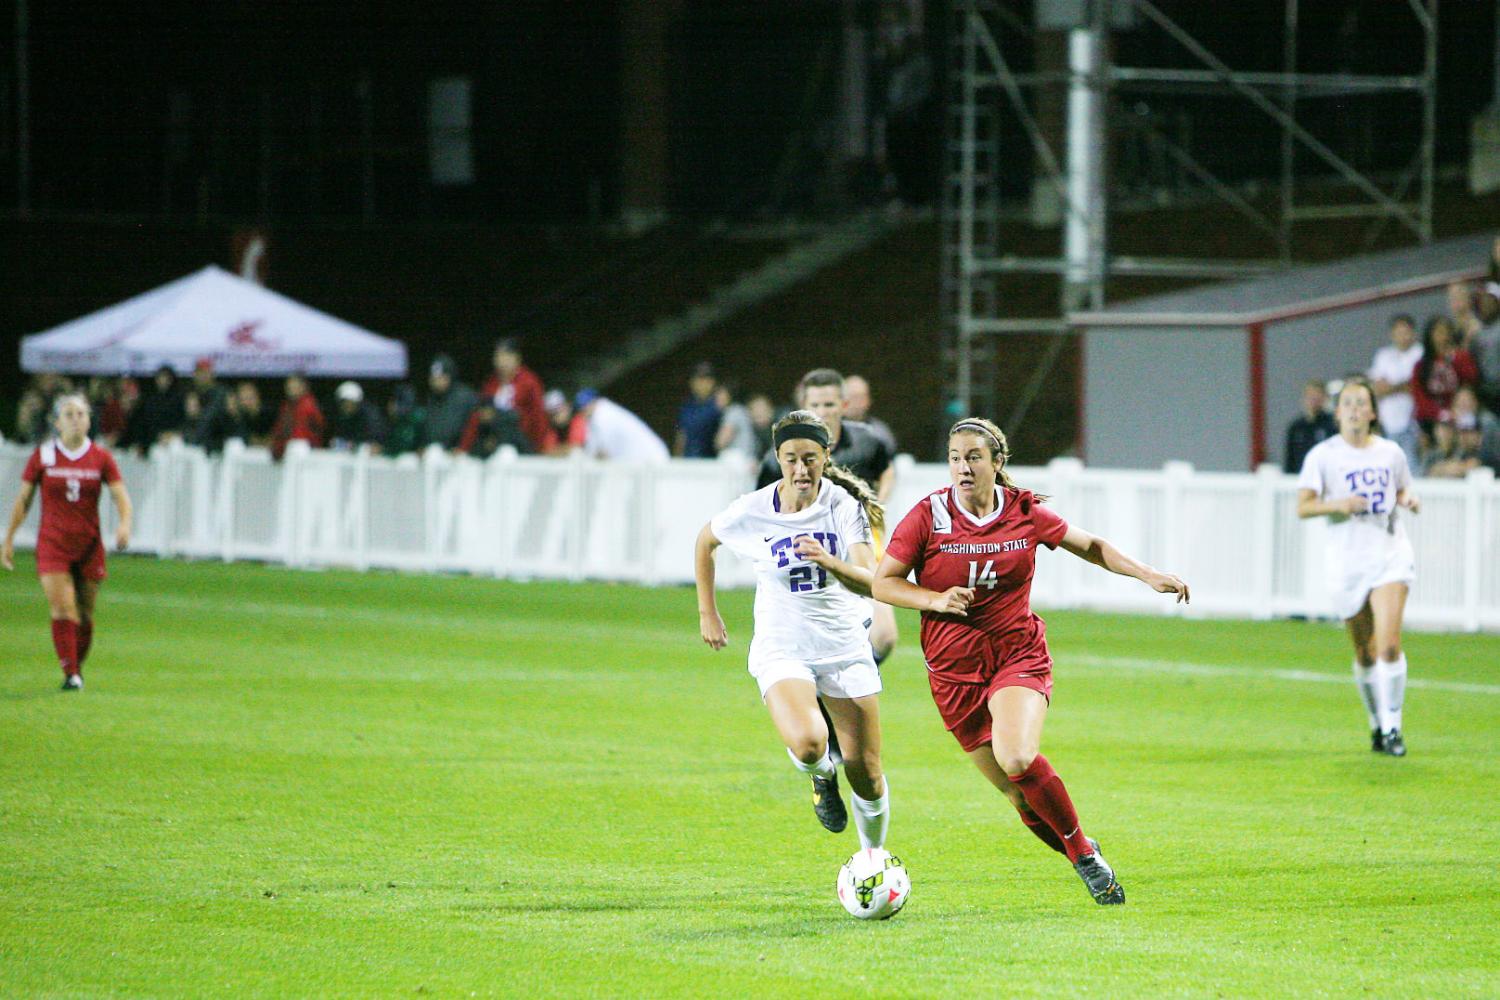 Redshirt+junior+forward+Beau+Bremer+dribbles+the+ball+past+a+TCU+defender+at+Lower+Soccer+Field%2C+Aug.+22%2C+2014.